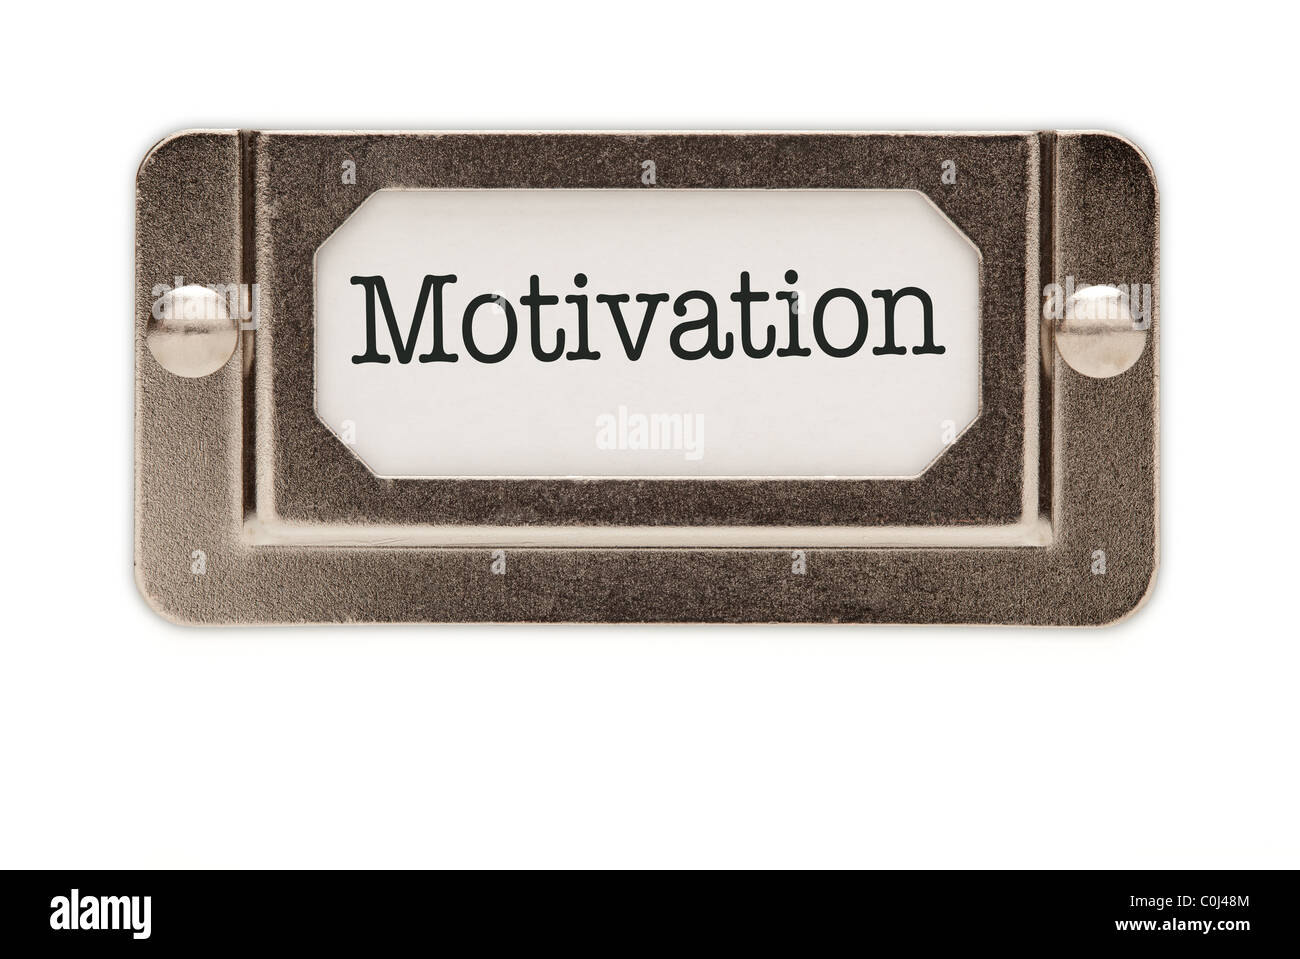 Motivation File Drawer Label Isolated on a White Background. Stock Photo